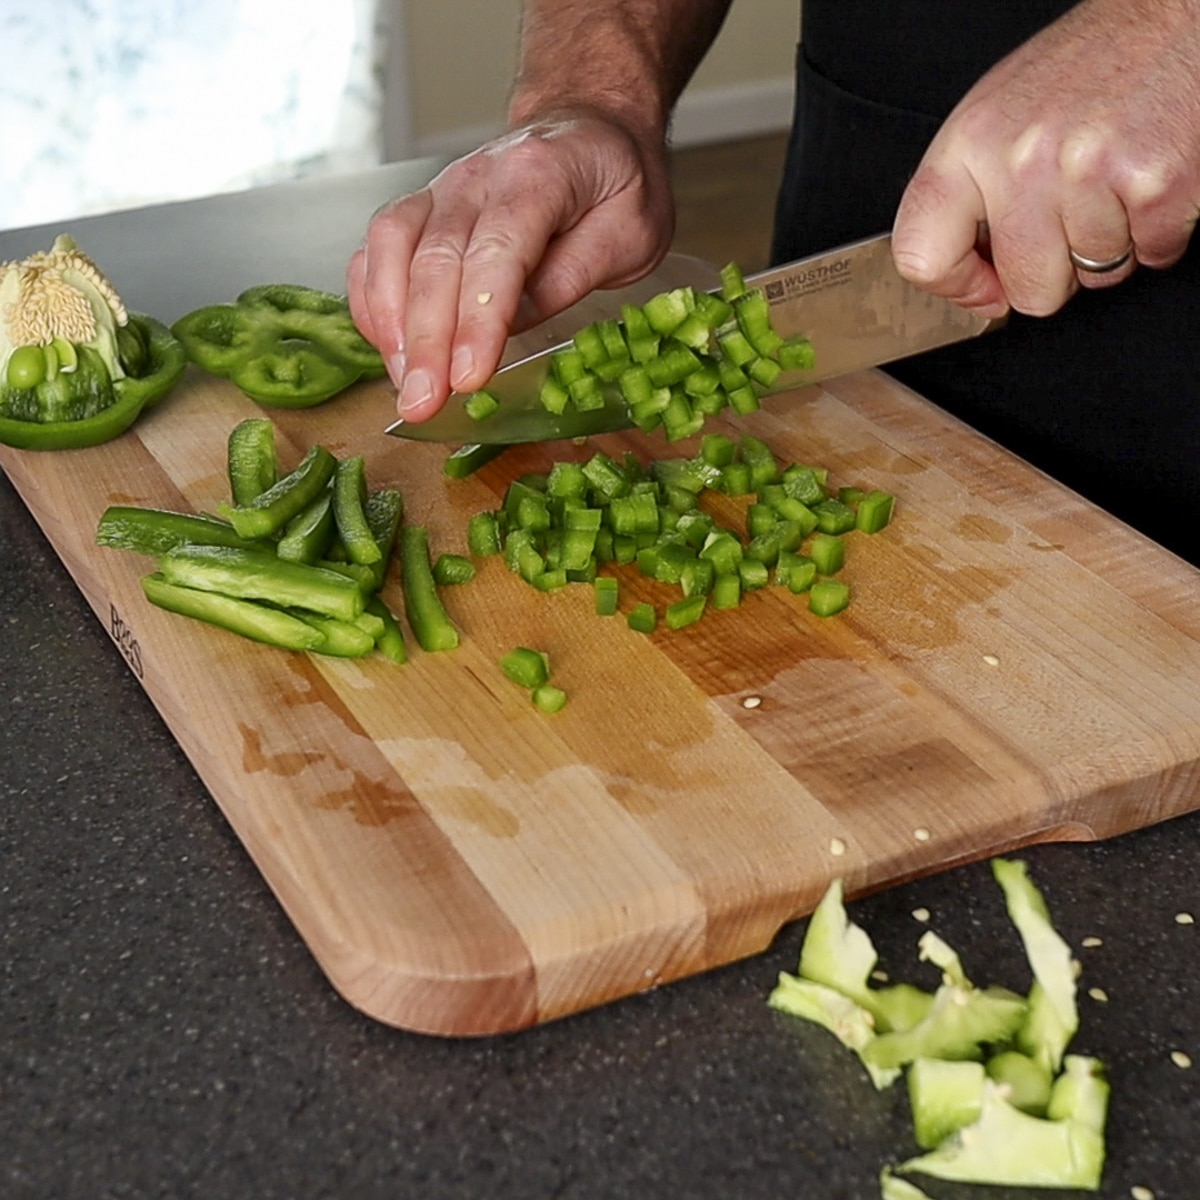 dicing the bell pepper